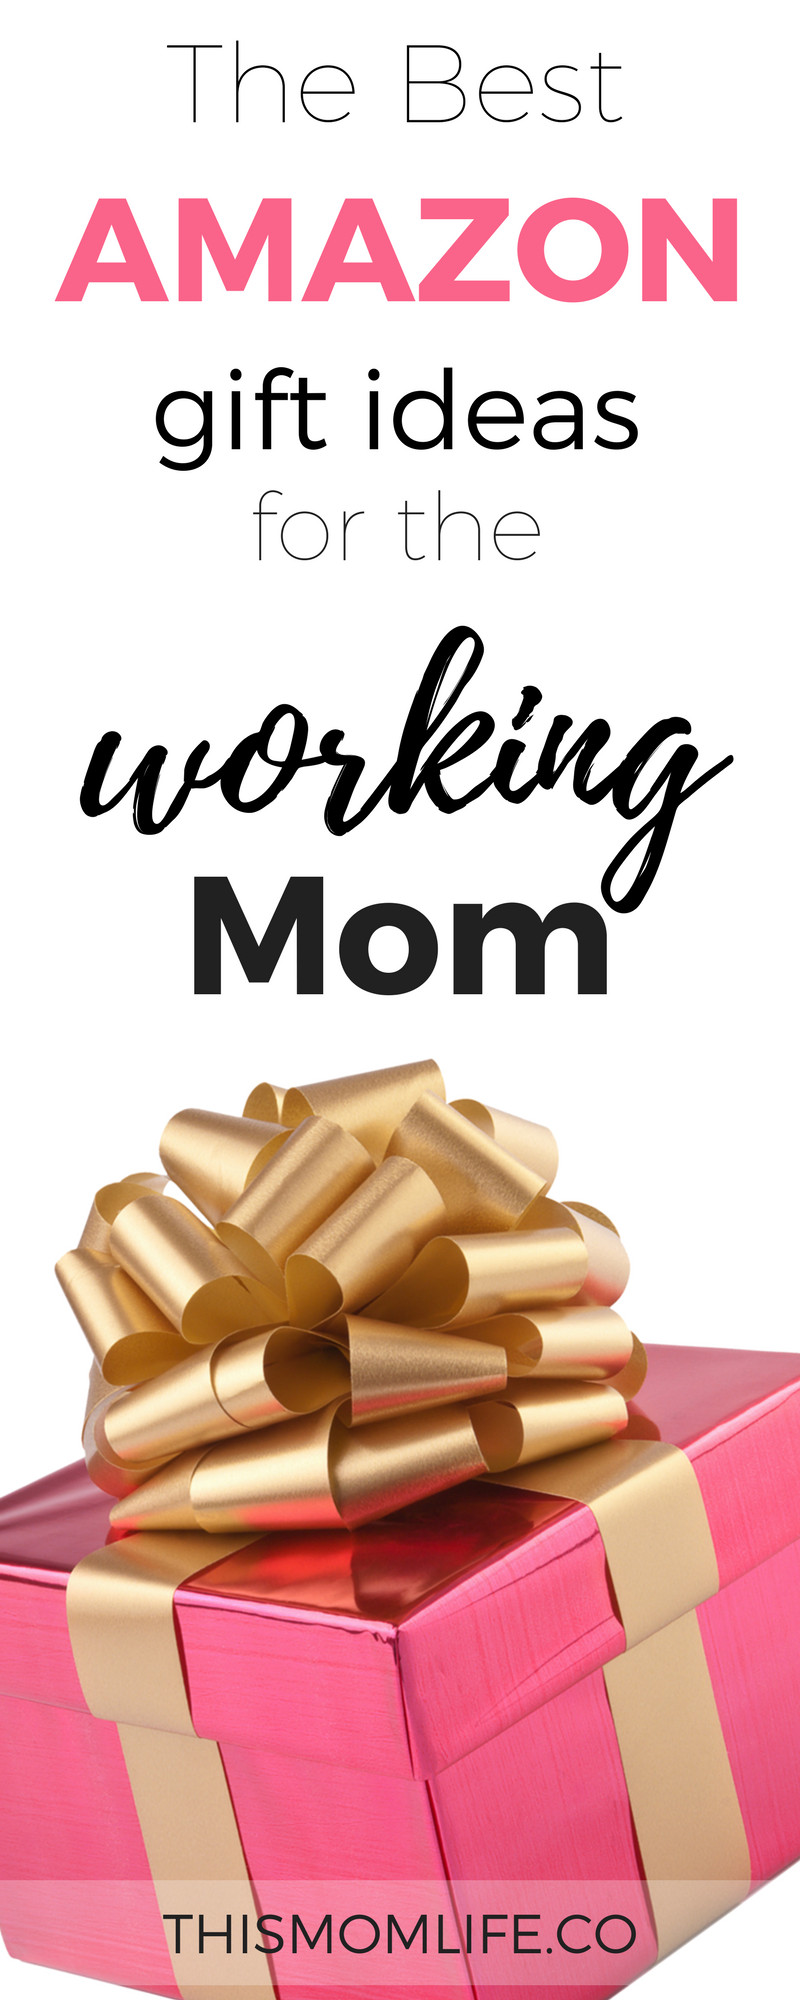 Great Gifts For Moms Birthday
 The Best Gift Ideas for Busy Moms This Mom Life